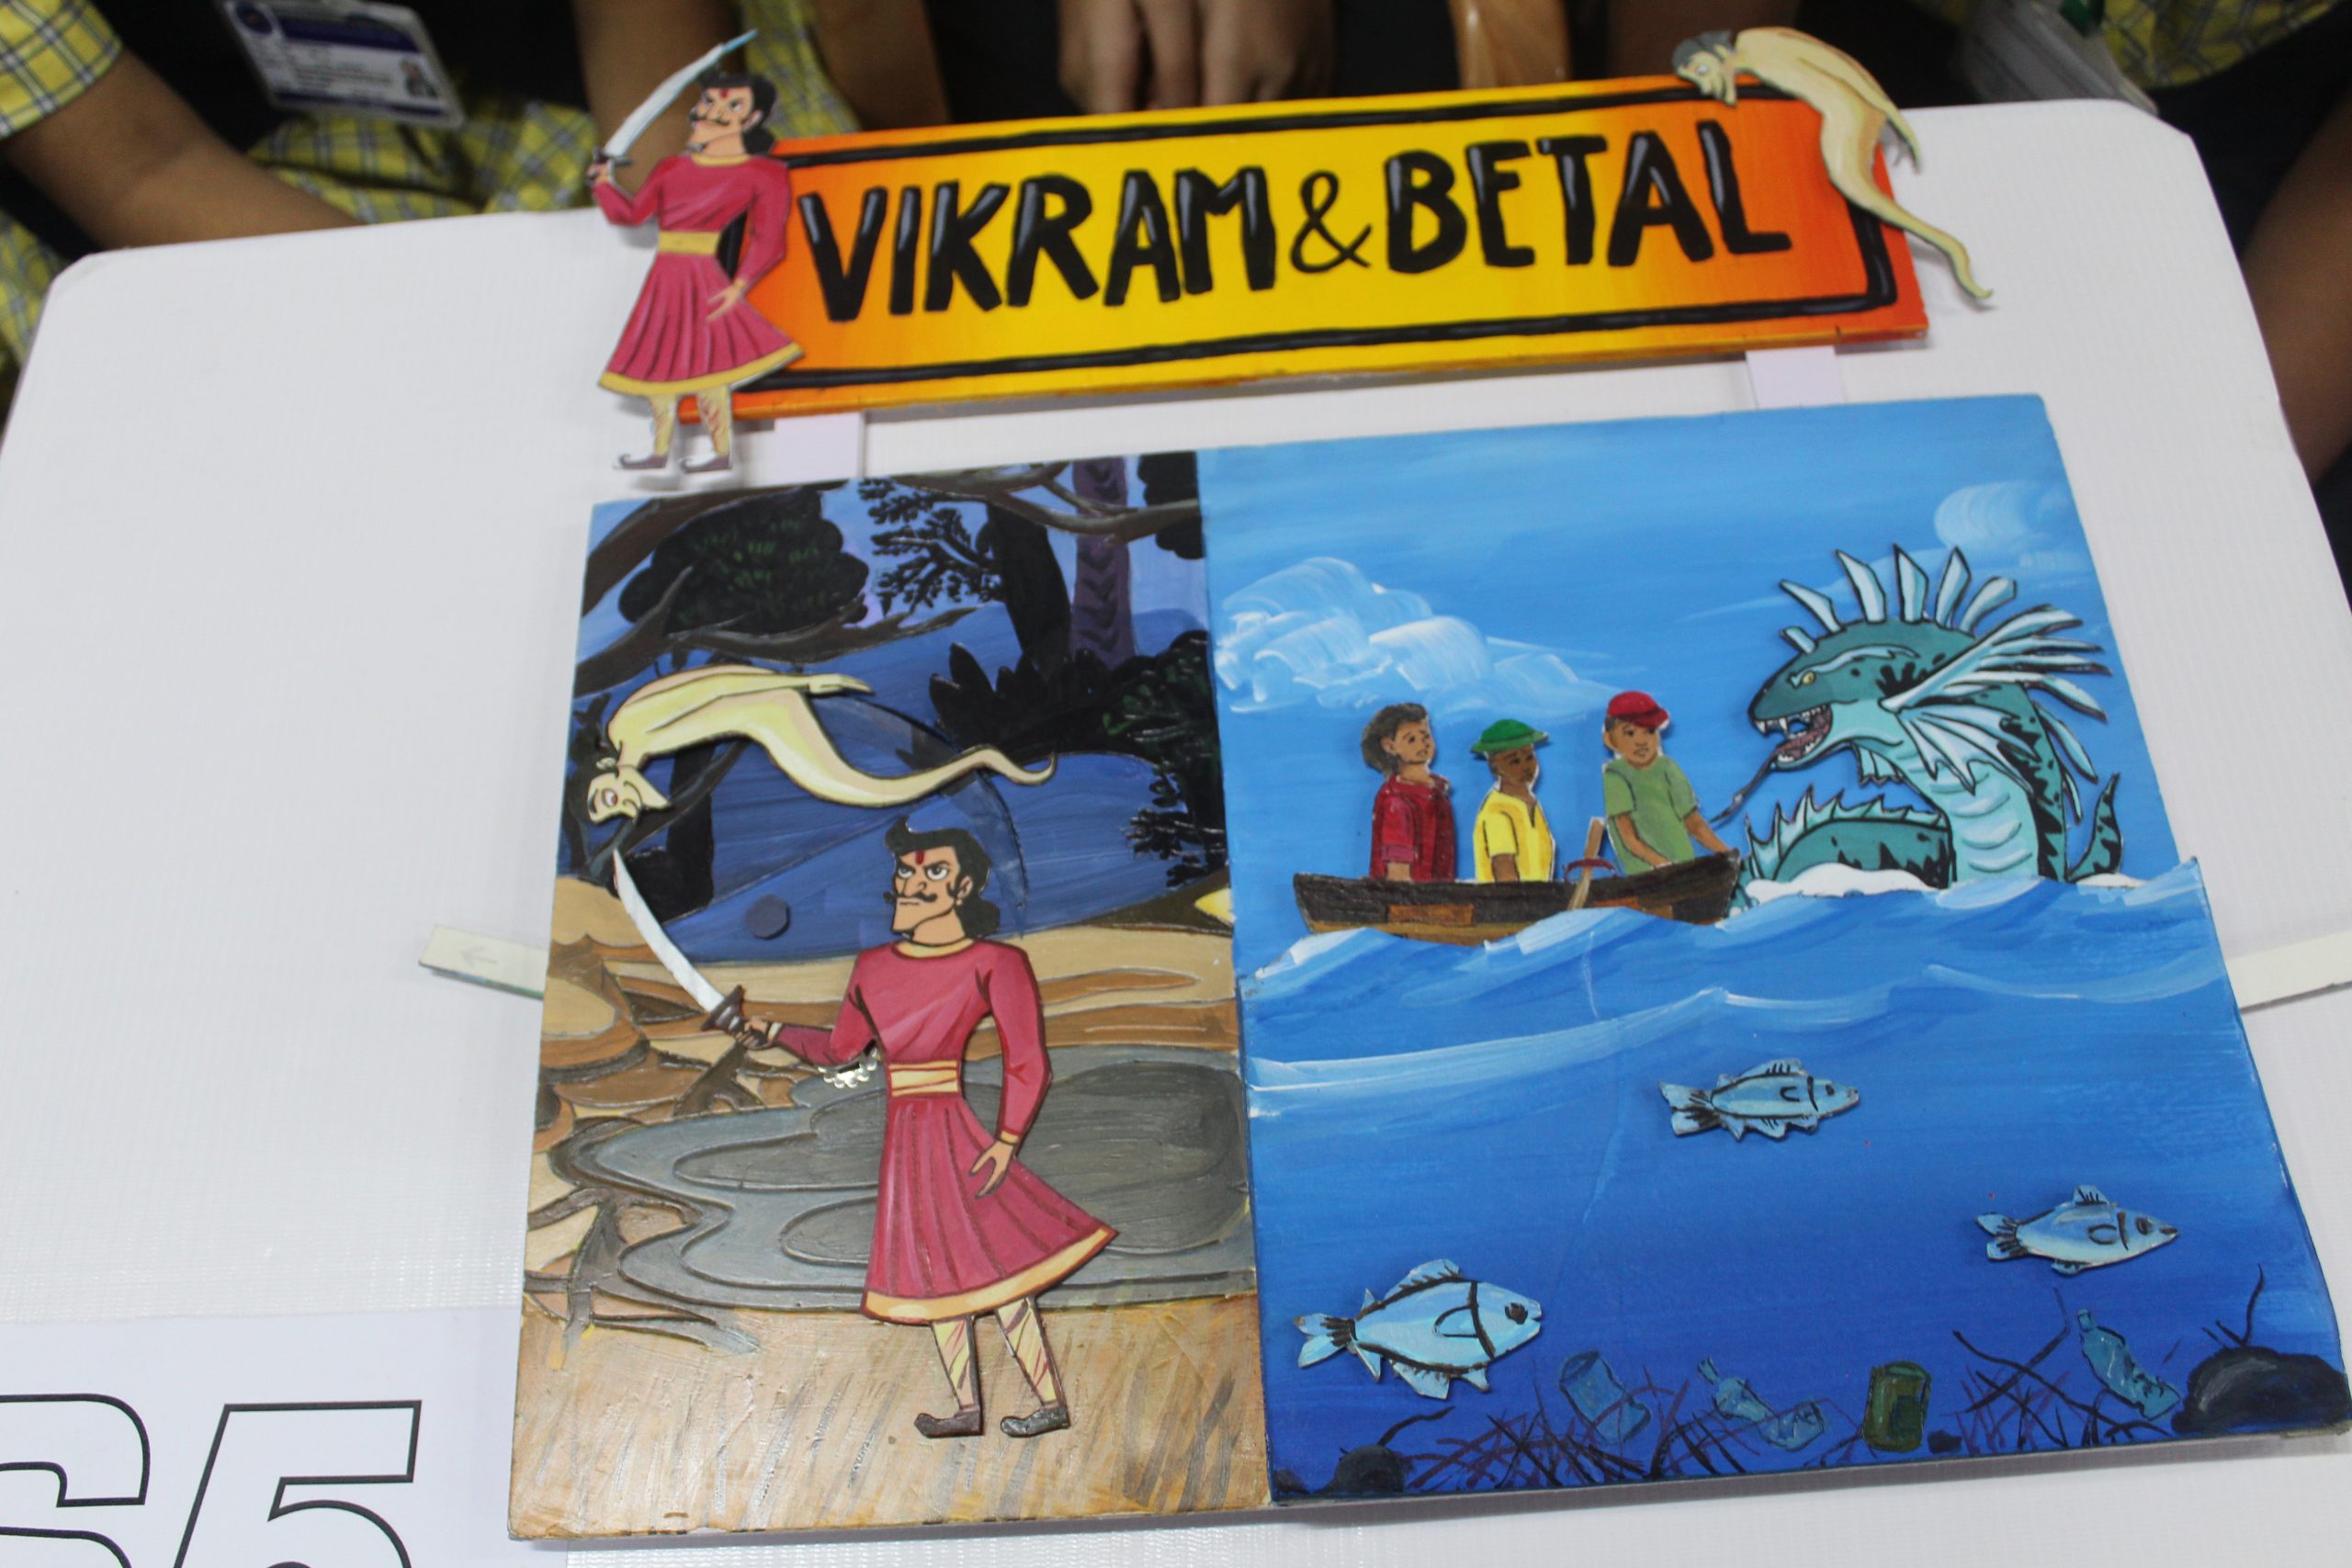 Student Project3: Vikram and Betal